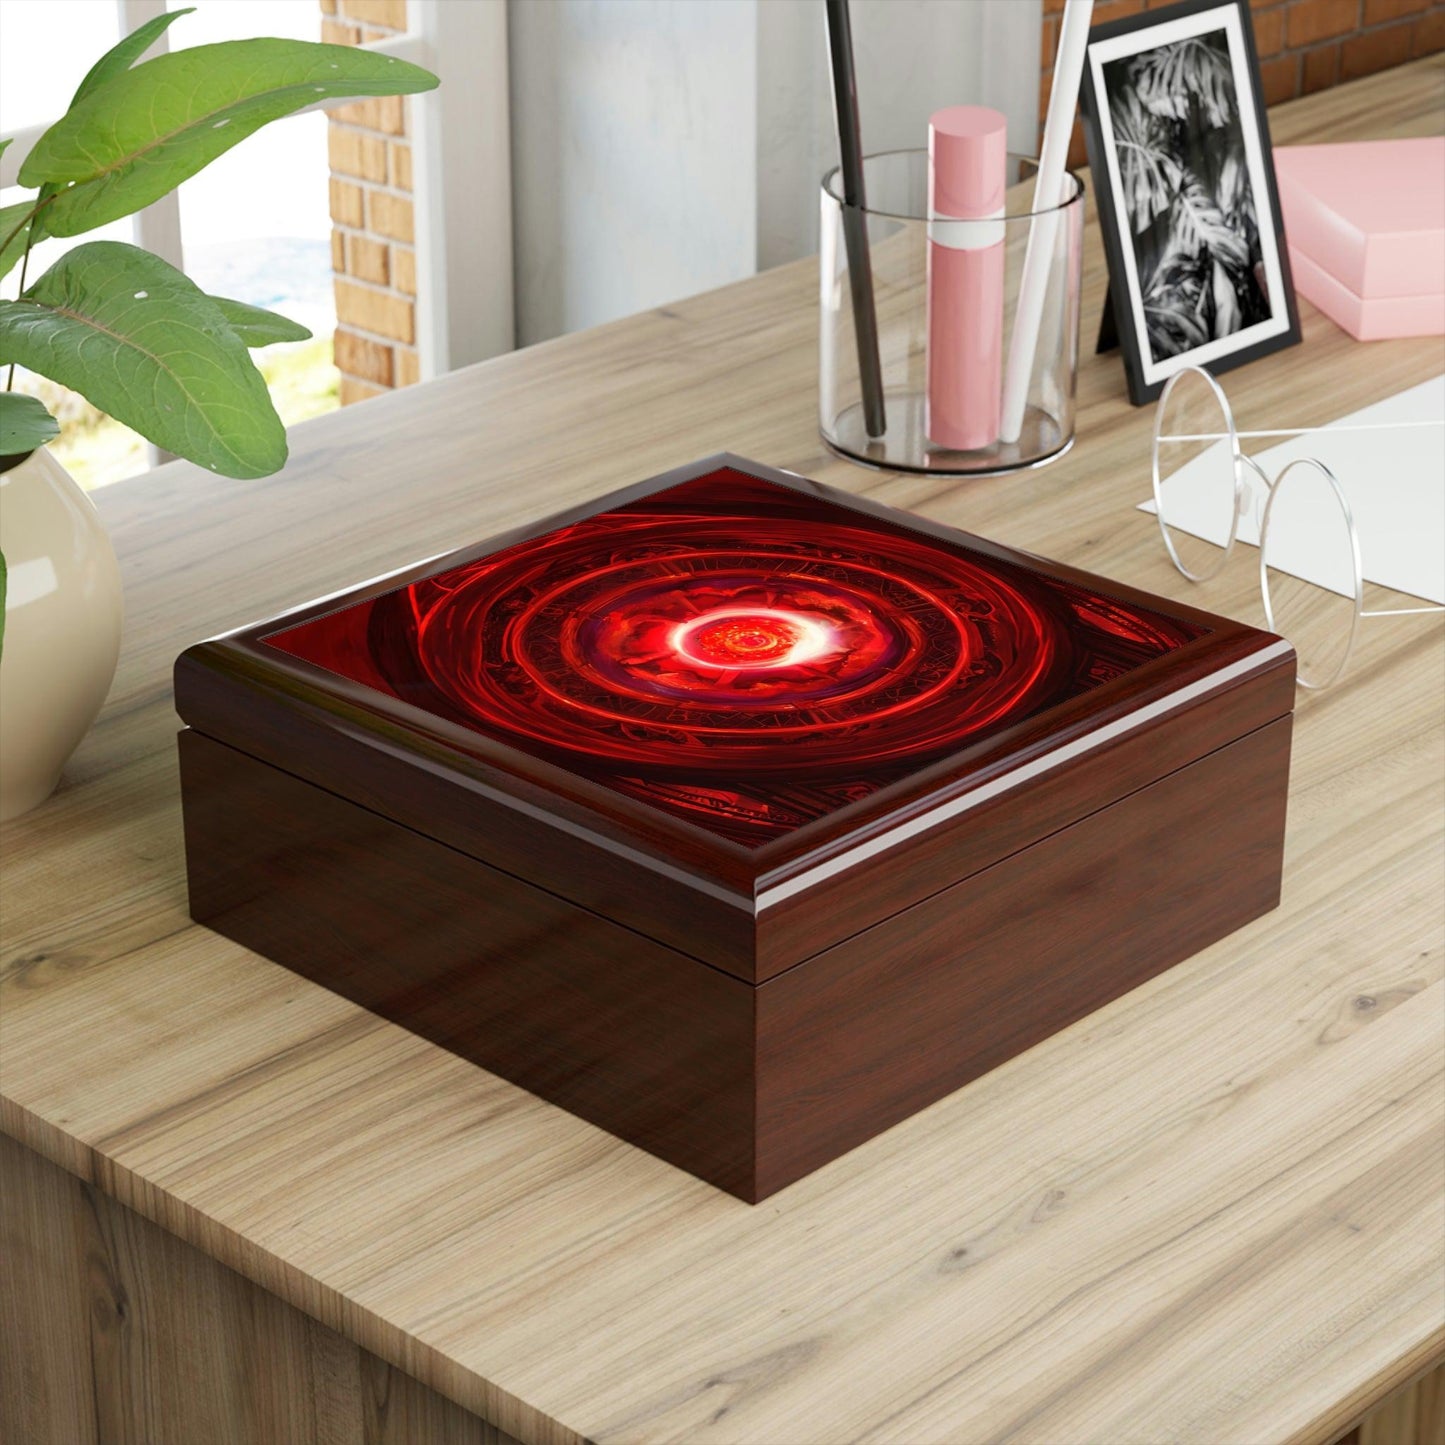 Red-Energy-Portal-Jewelry-Box-to-storing-your-talismans-and-rings-8